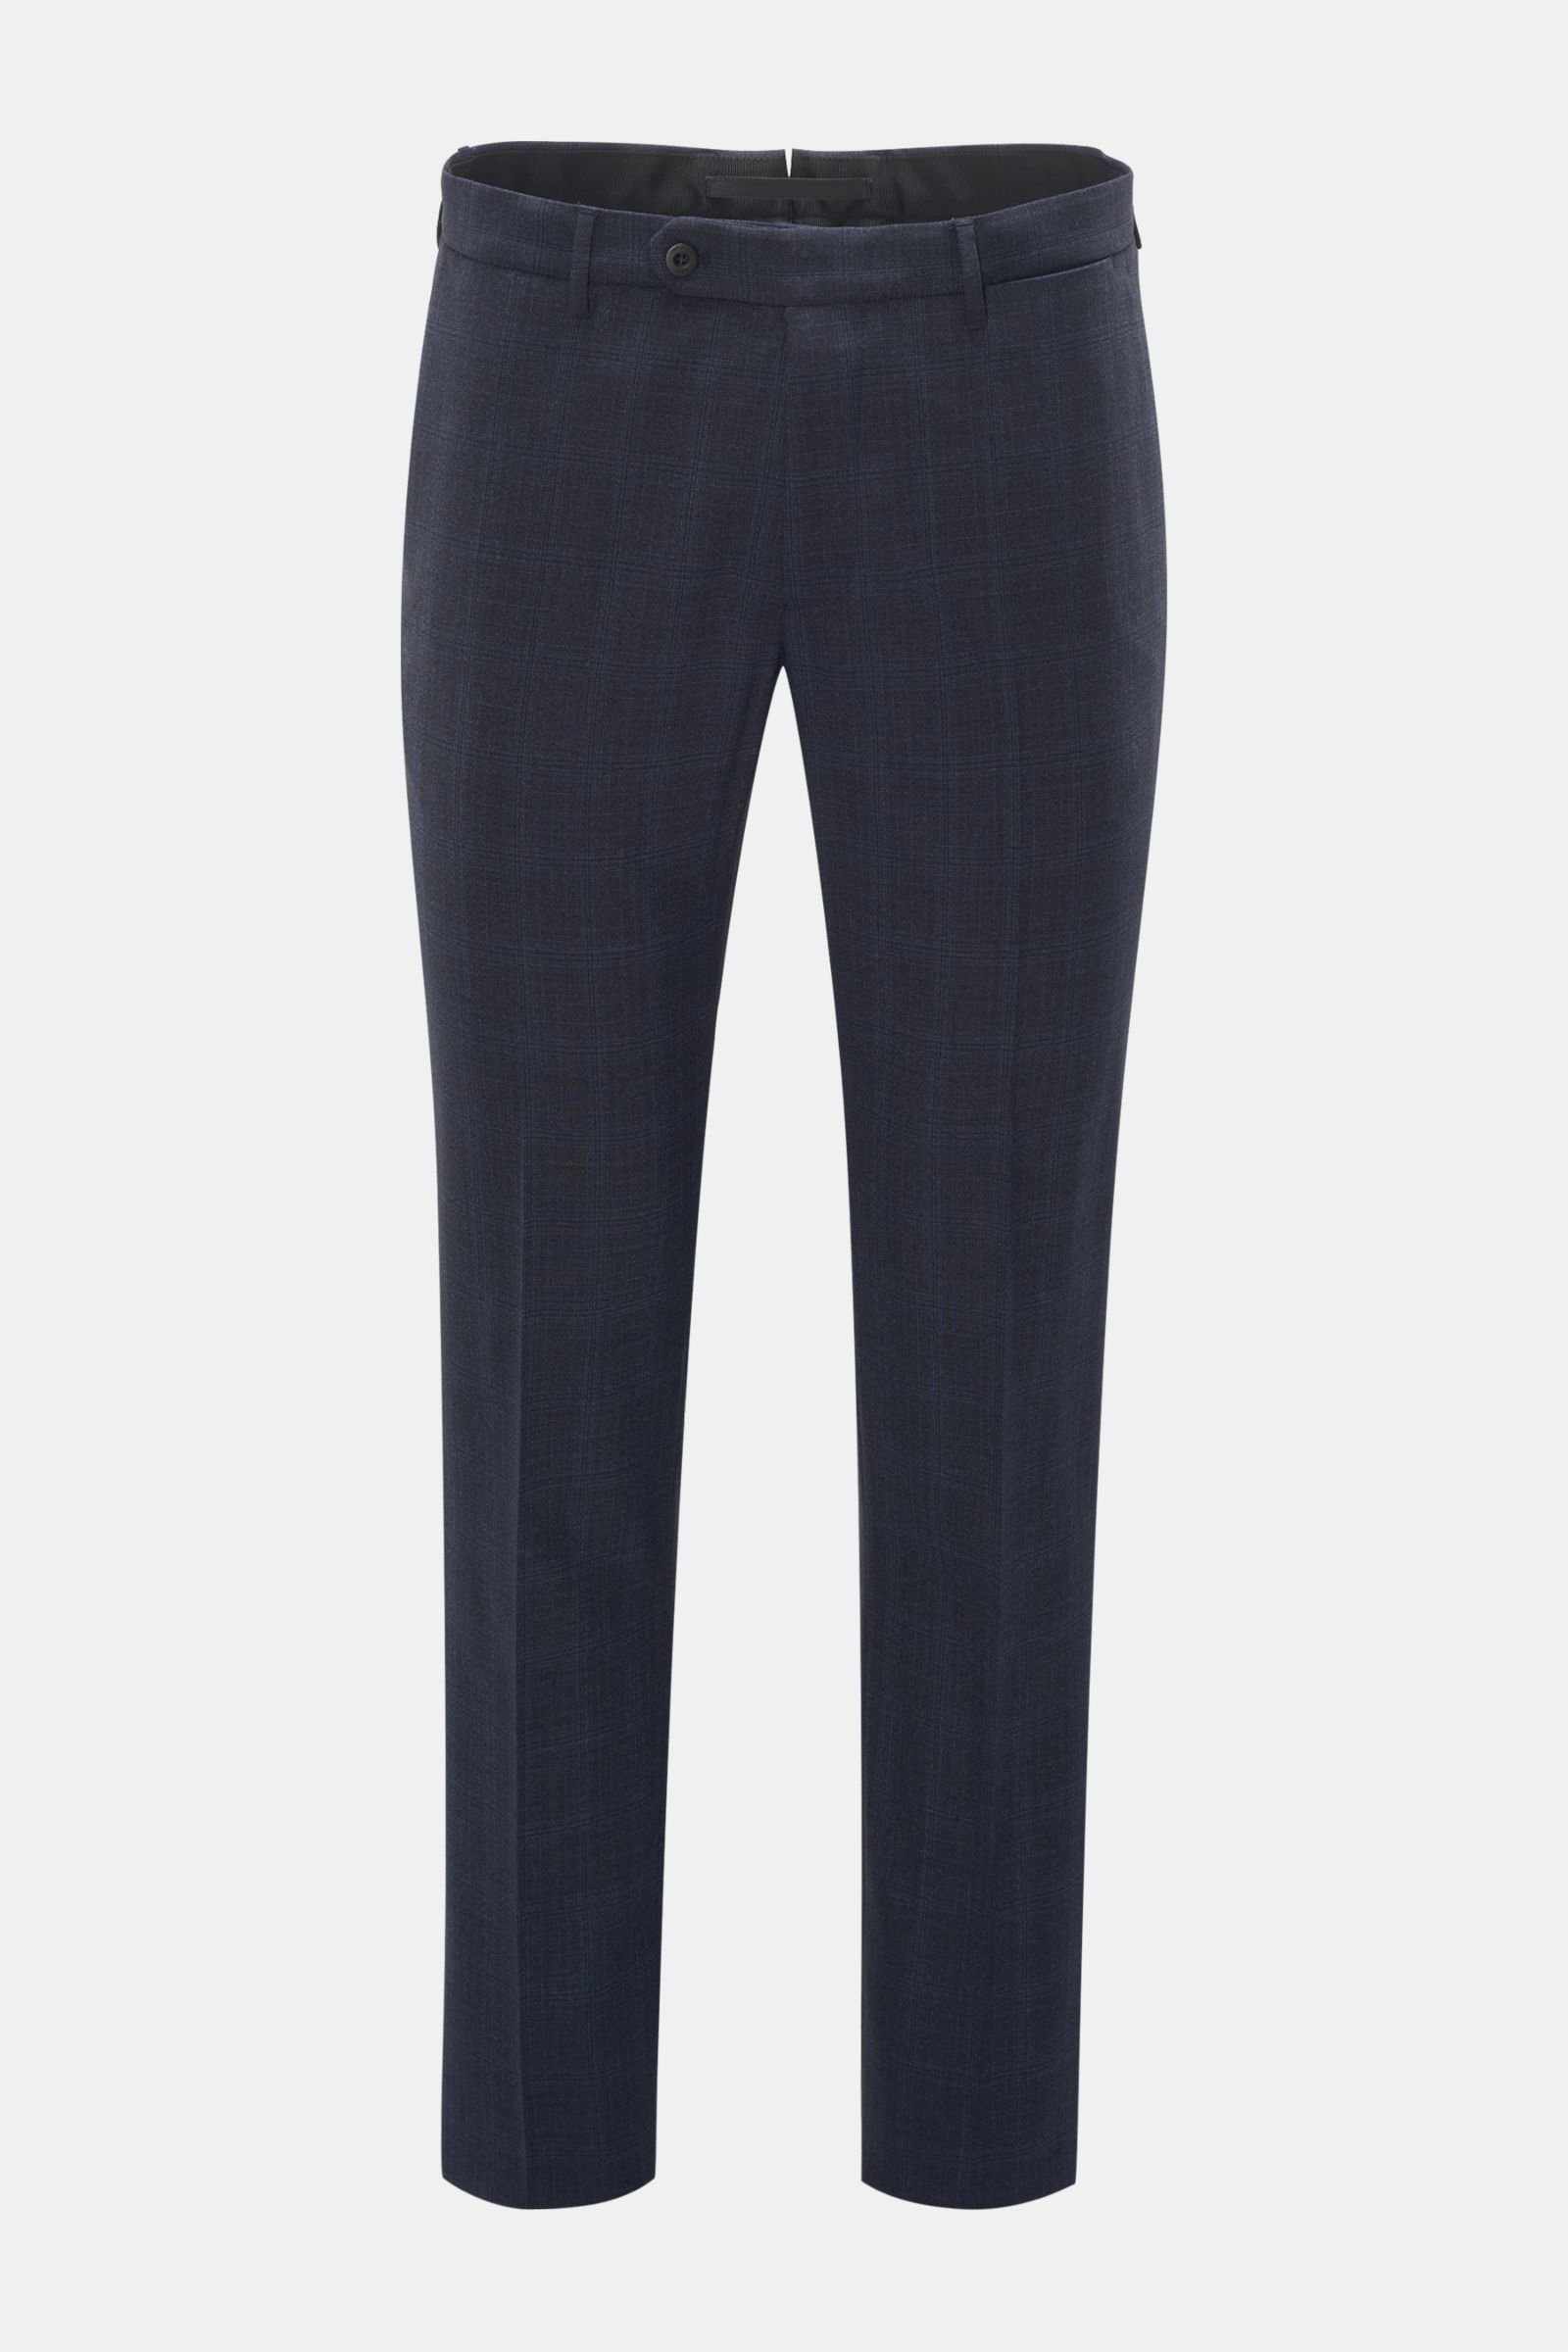 Trousers 'Urban Traveller' navy checked